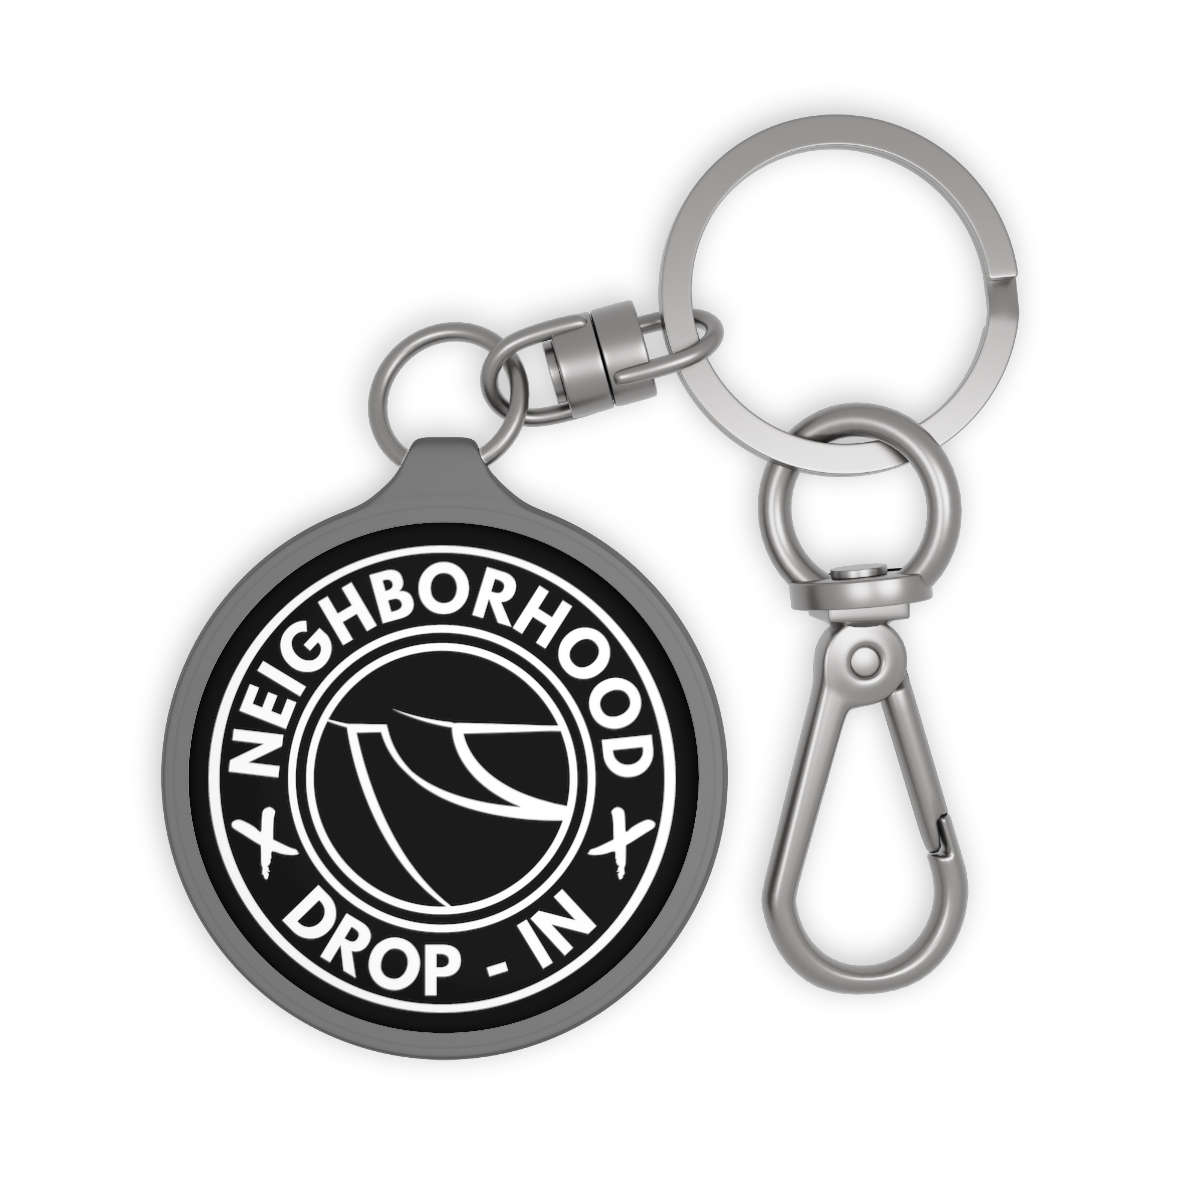 Drop In Keychain (Black) product thumbnail image